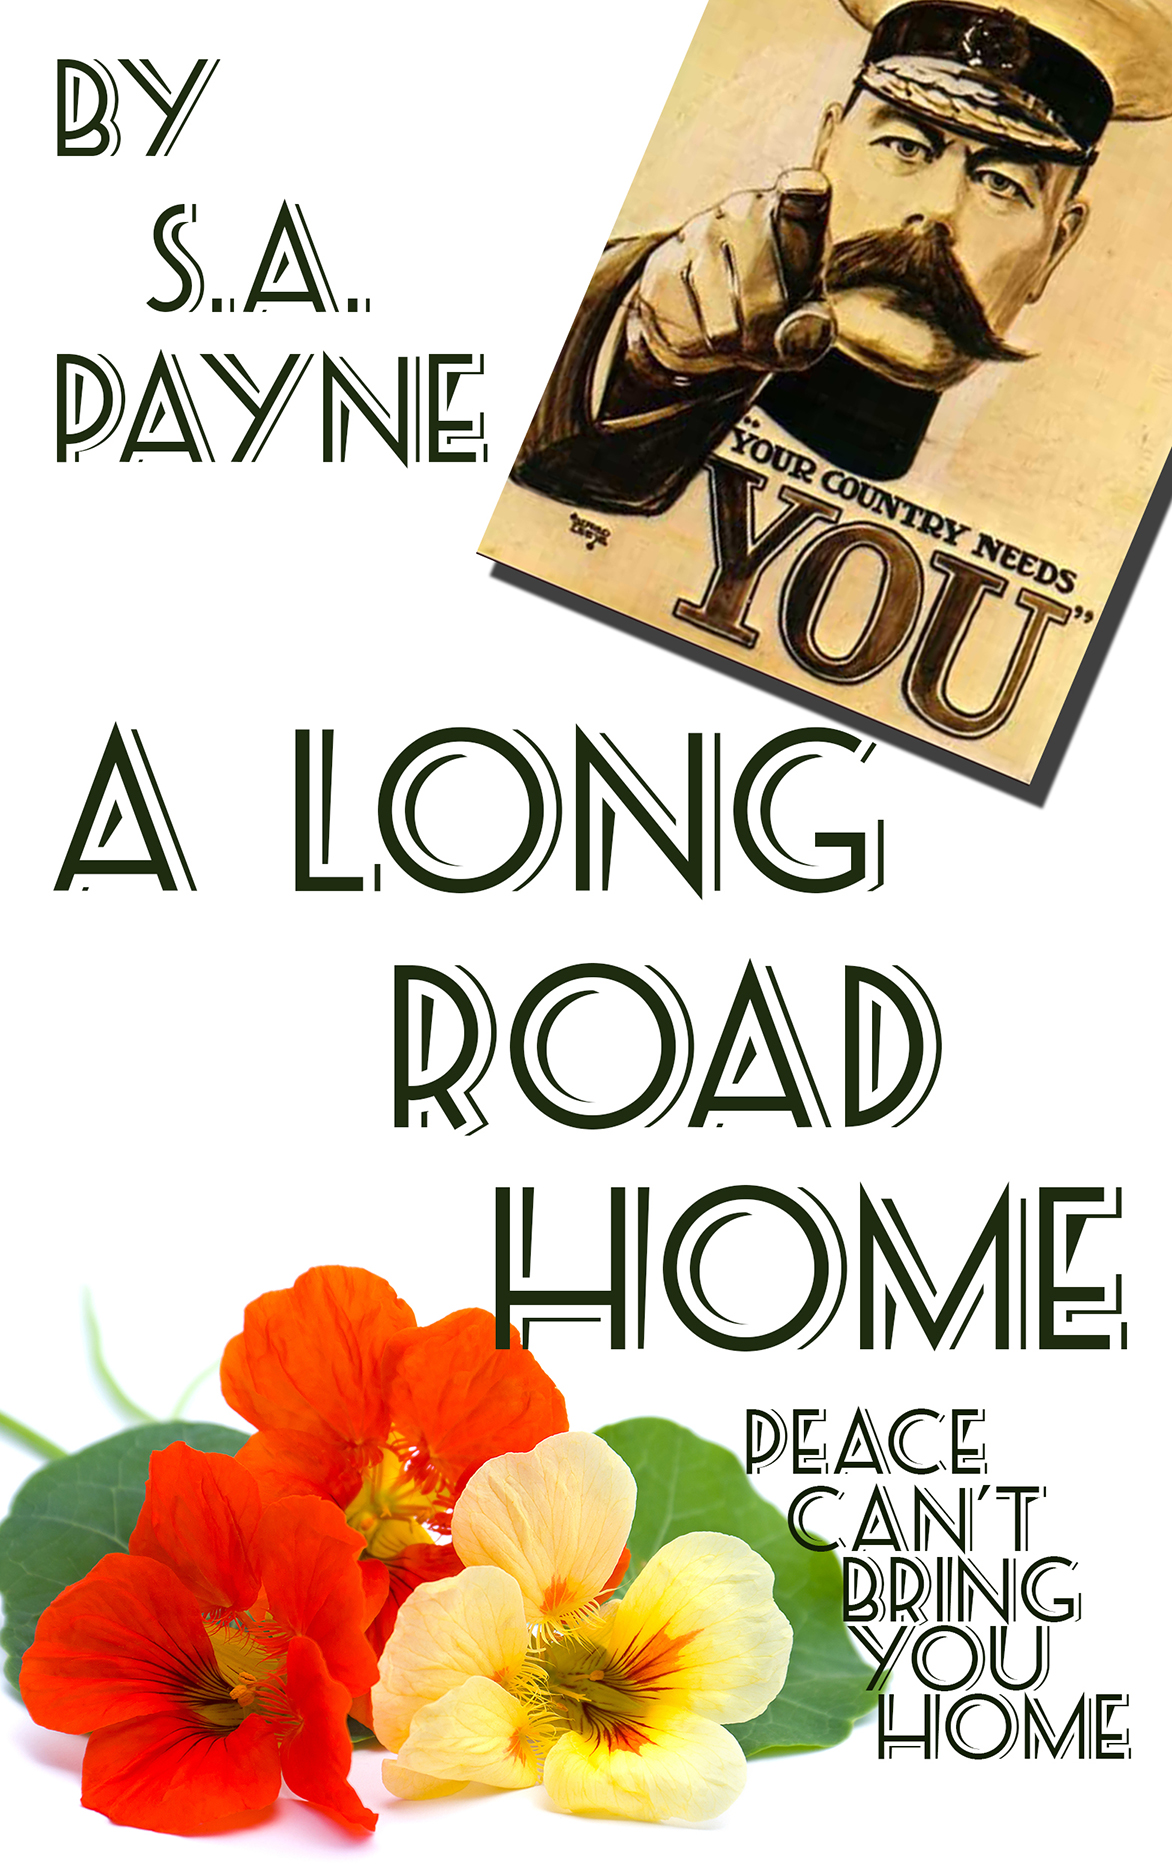 A Long Road Home by S.A. Payne